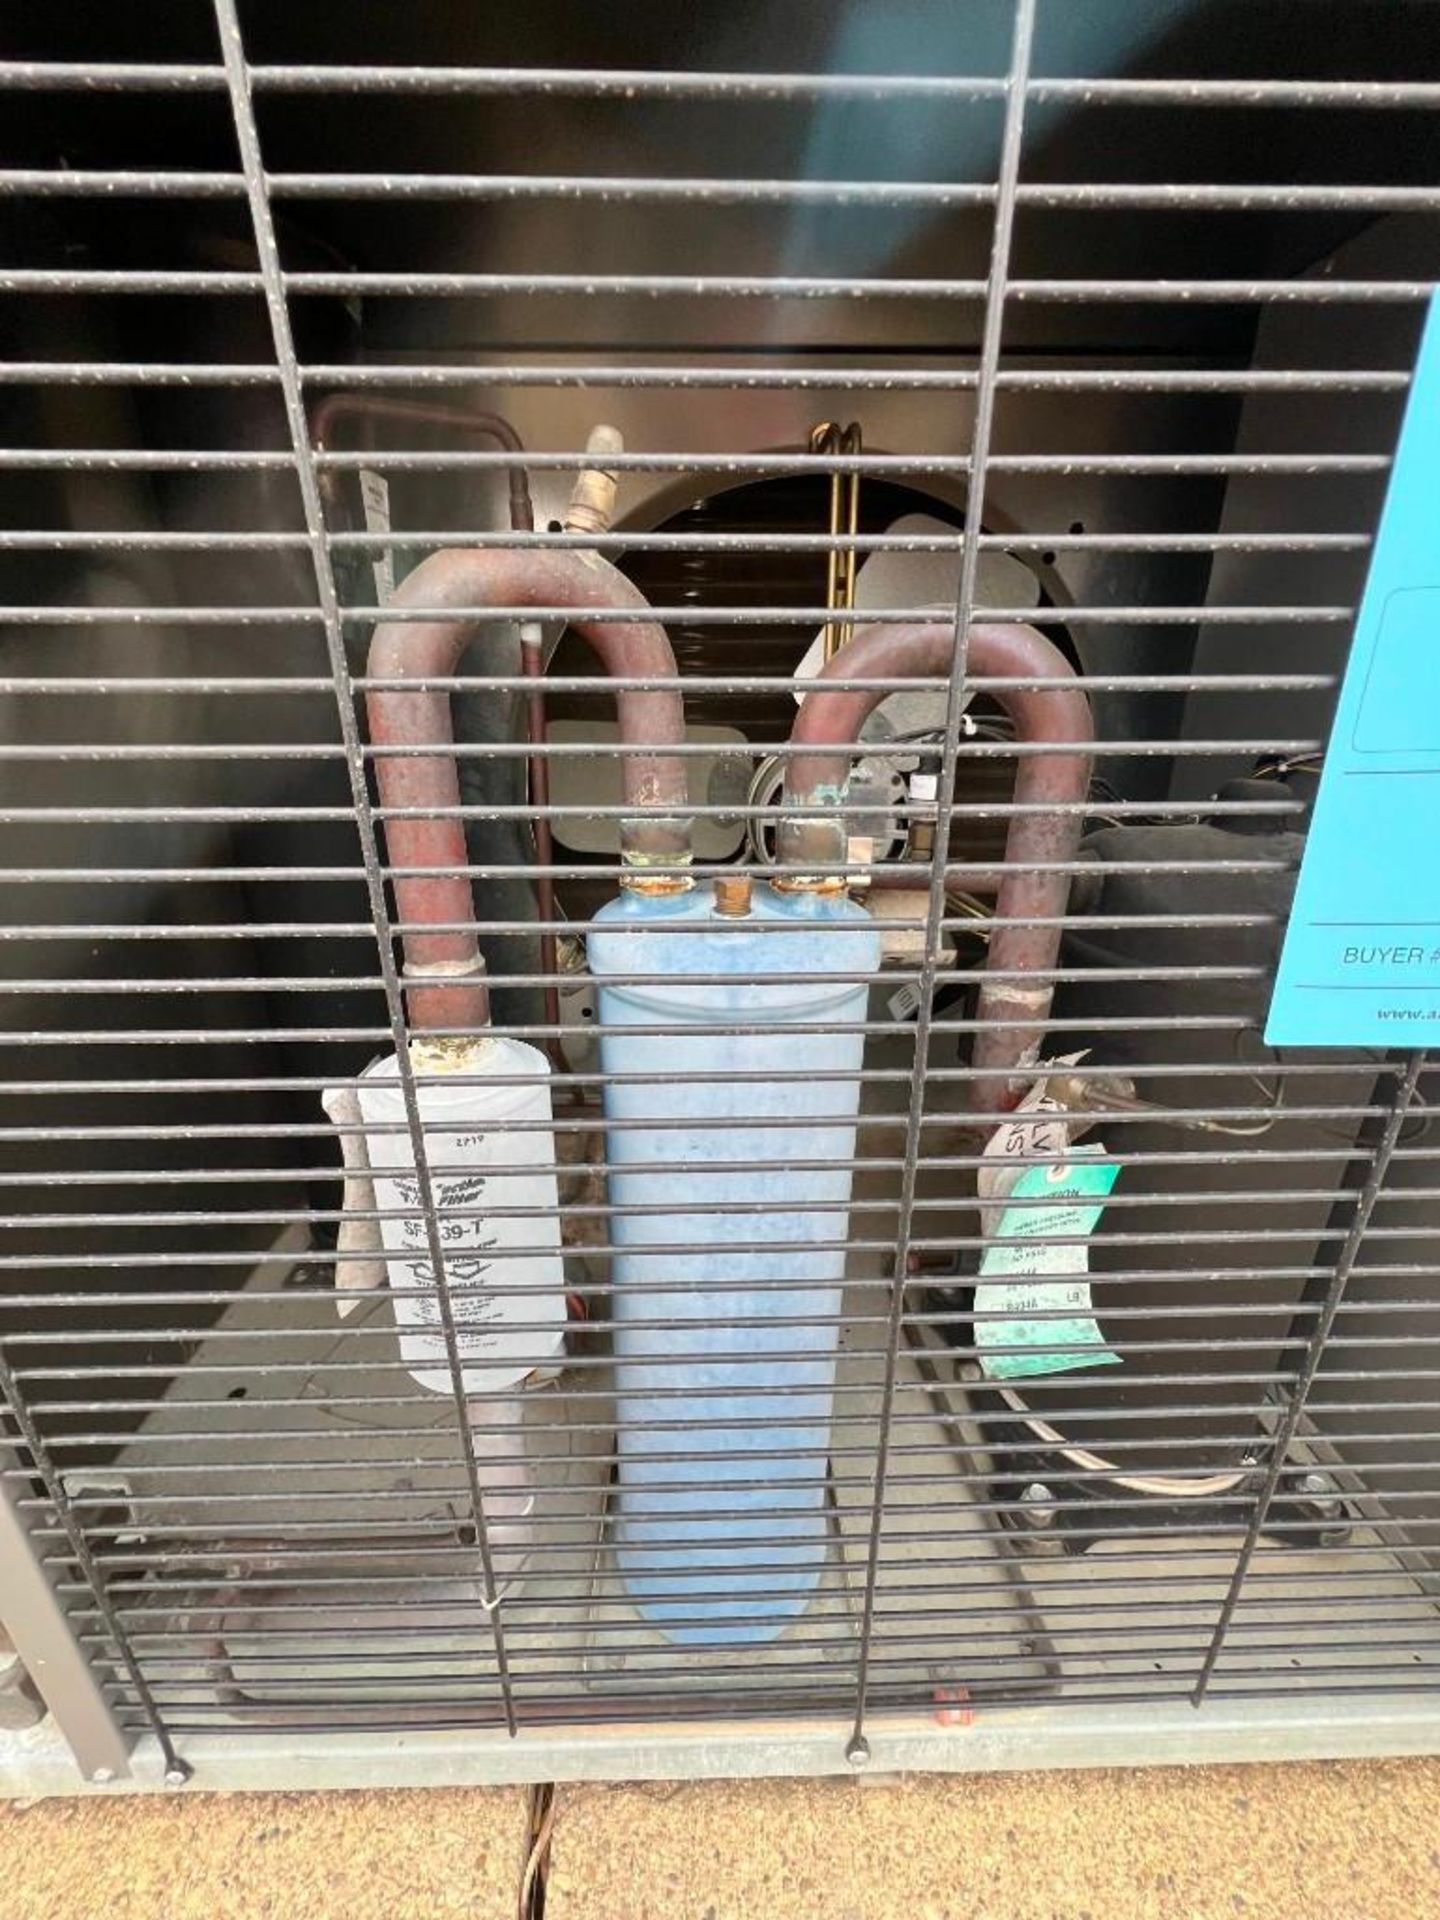 Heat Transfer Products Condensing Unit, Model RRFO600L4SEAASK, Catalog# FO600L4SEA, Serial# E3119008 - Image 8 of 9